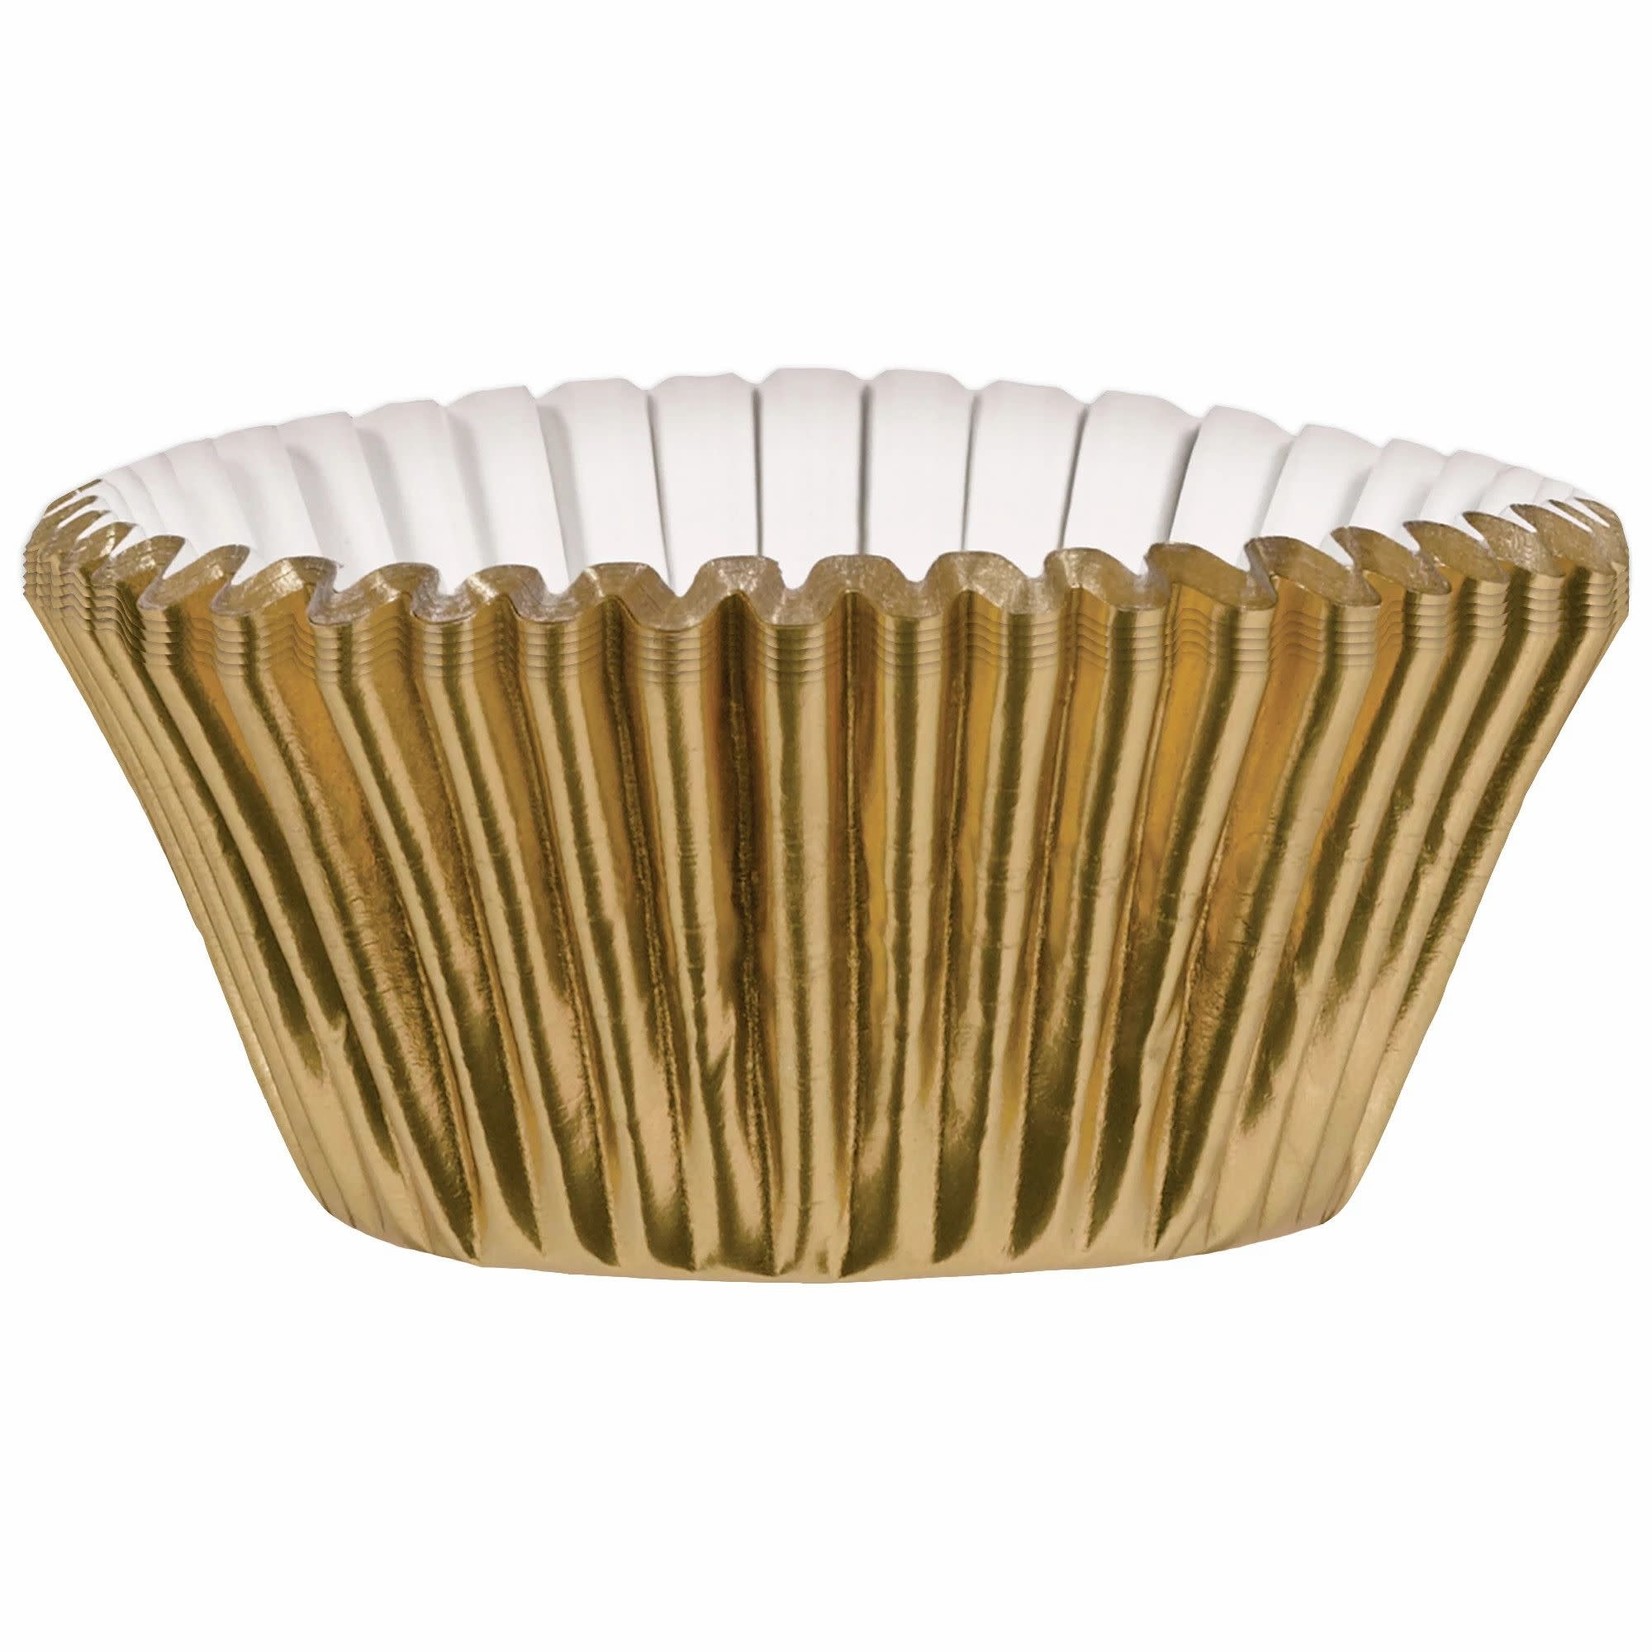 Amscan 2" Gold Foil Baking Cups - 24ct.